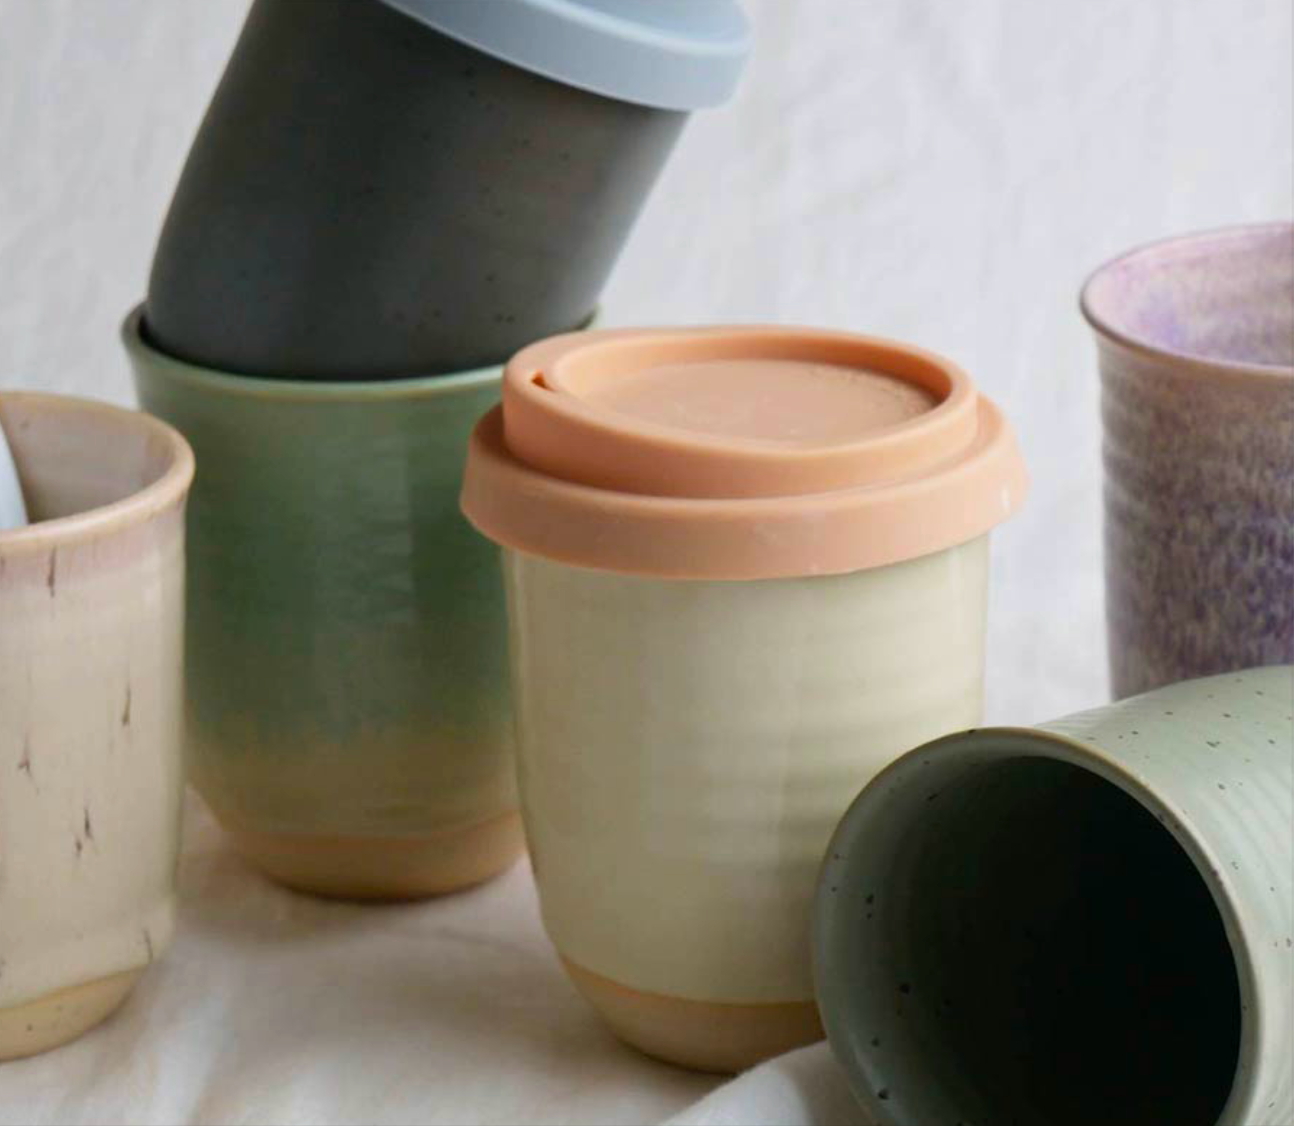 An assortment of Ceramic Keep Cups by Sam Mayell in various colors, some with lids, arranged casually on a pale surface.